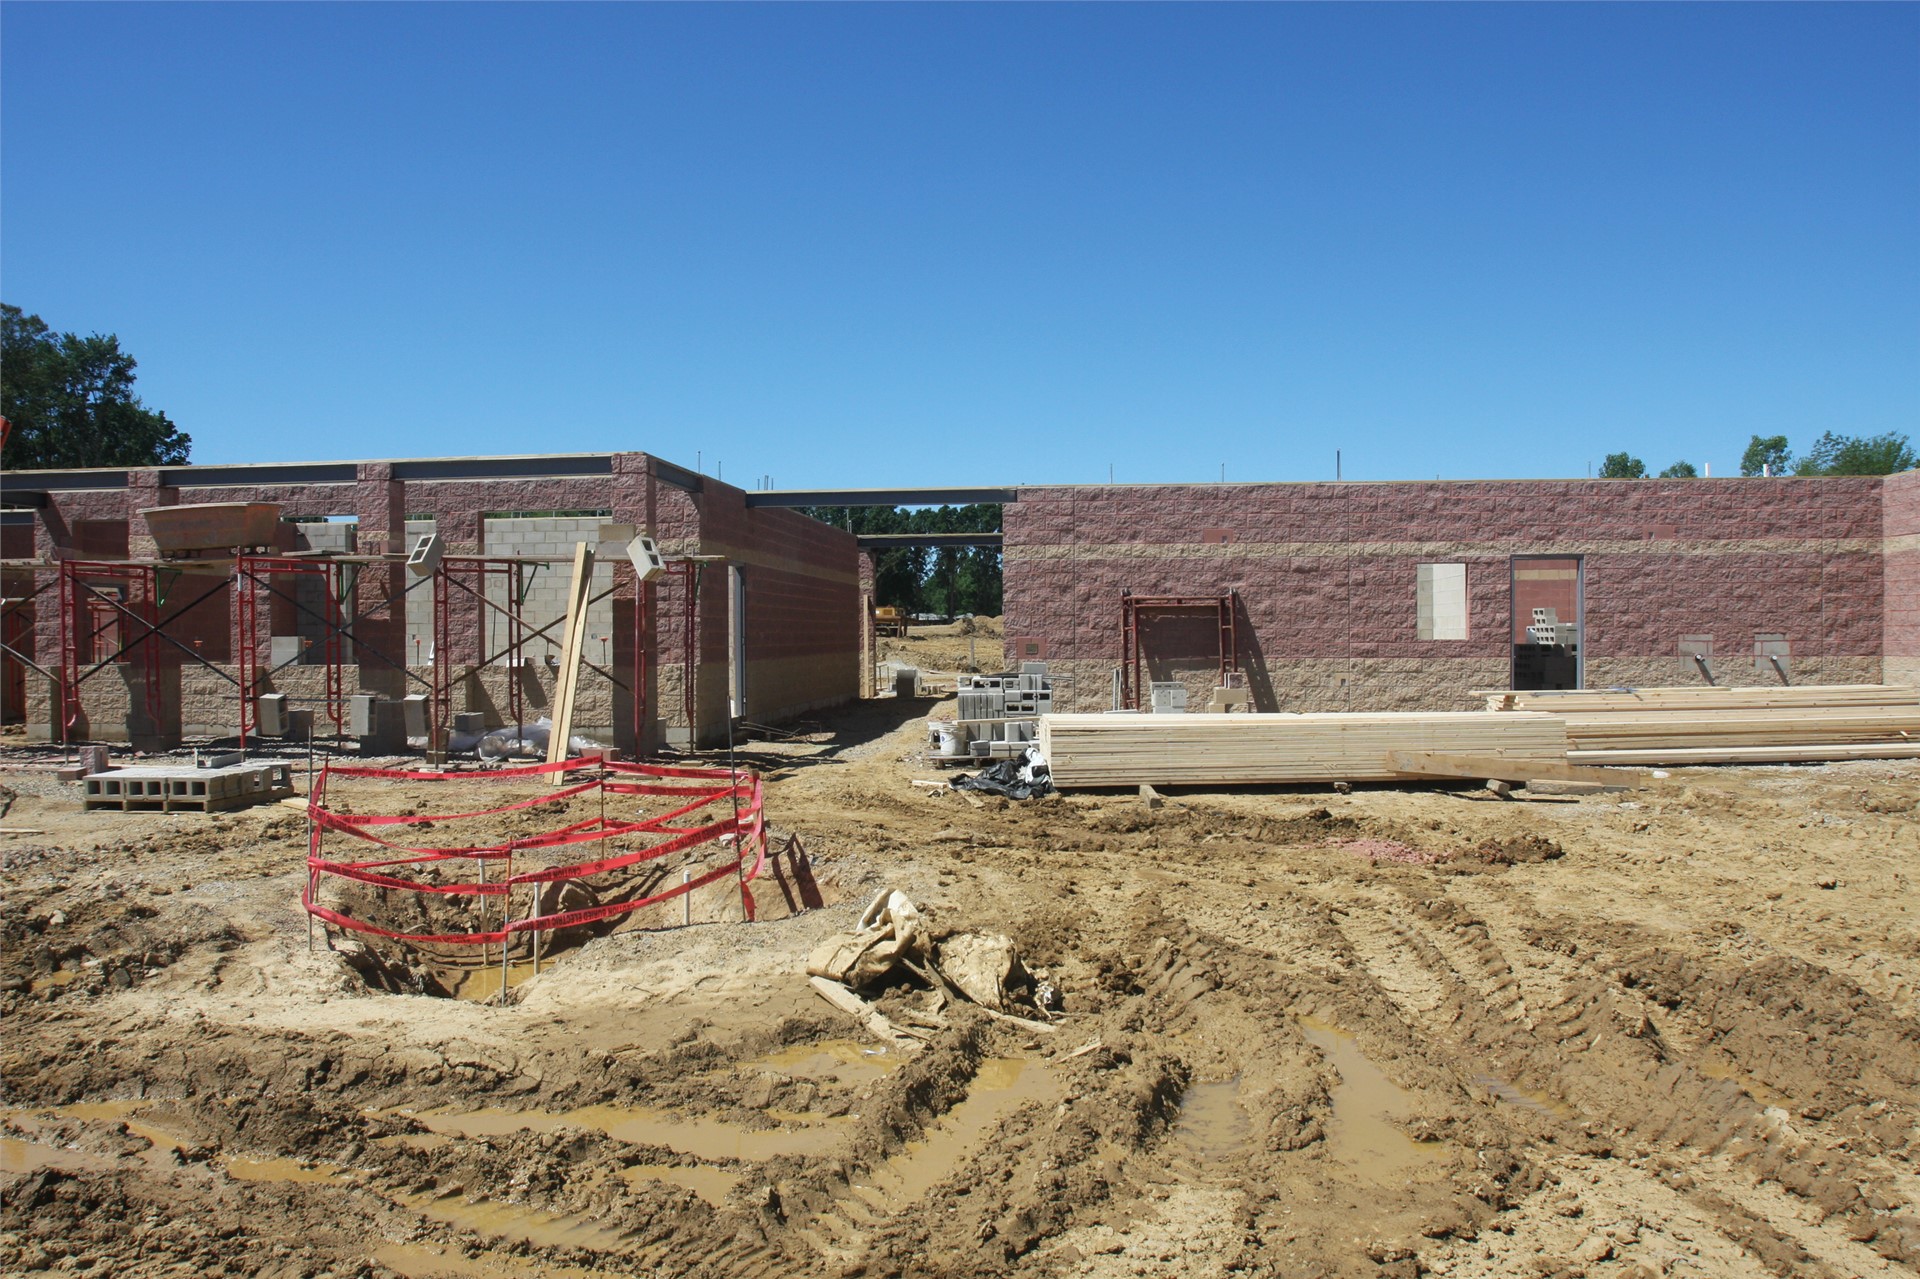 Concession stand, east tunnel, restrooms/visitor locker room (from inside stadium)